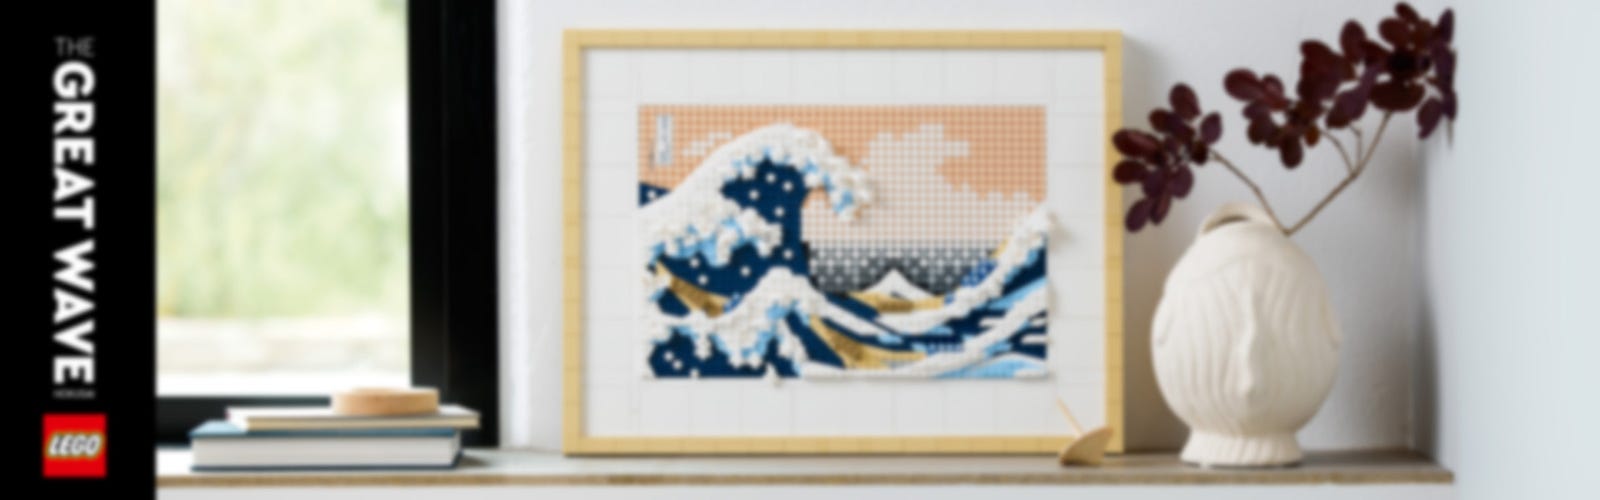 Great Wave Wall Hanging Ocean Wave Photo Banner India